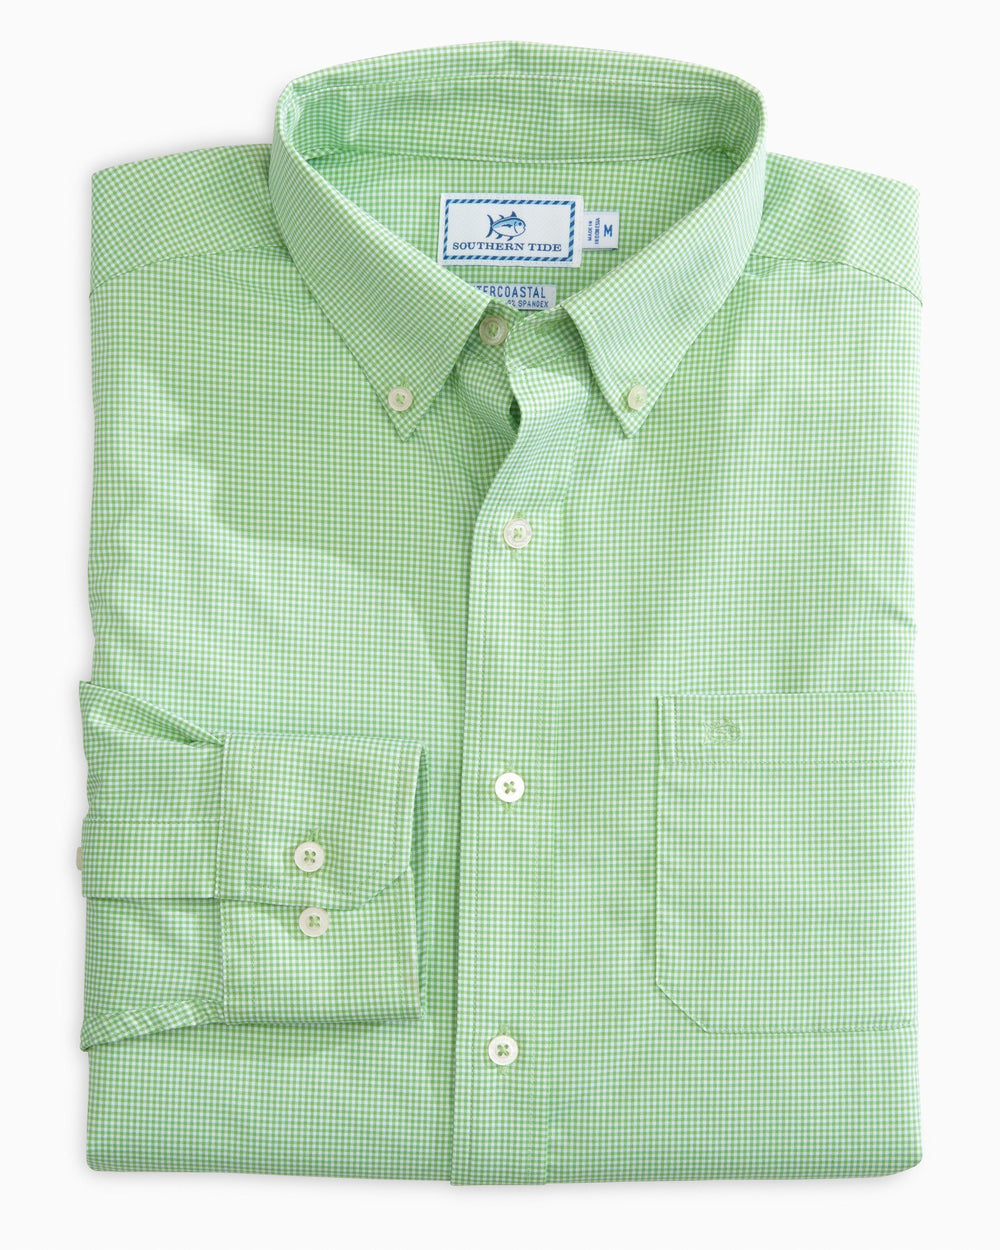 The front view of the Men's Green Micro Gingham Intercoastal Performance Sport Shirt by Southern Tide - Green Tea